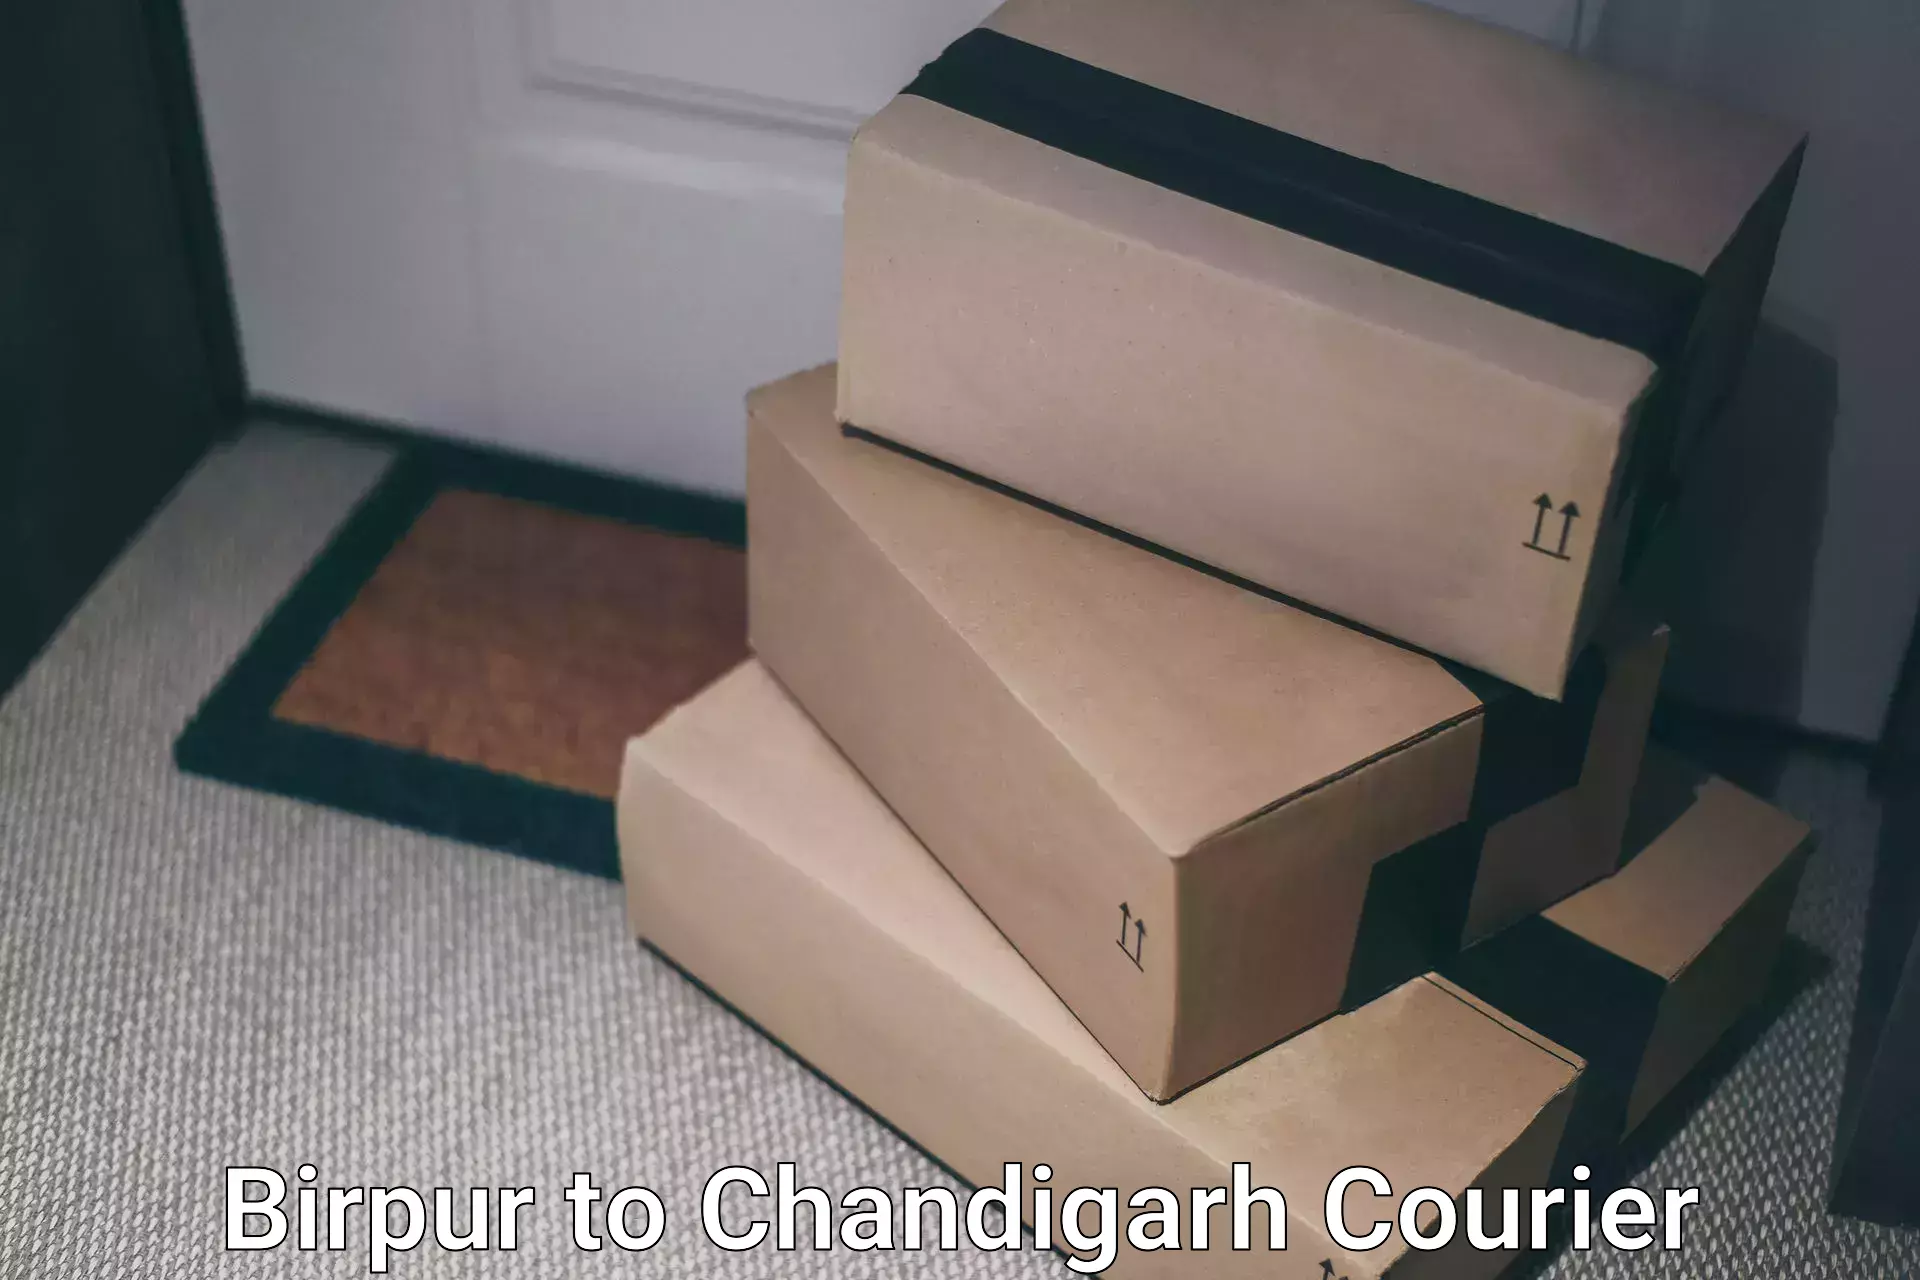 High-priority parcel service Birpur to Chandigarh